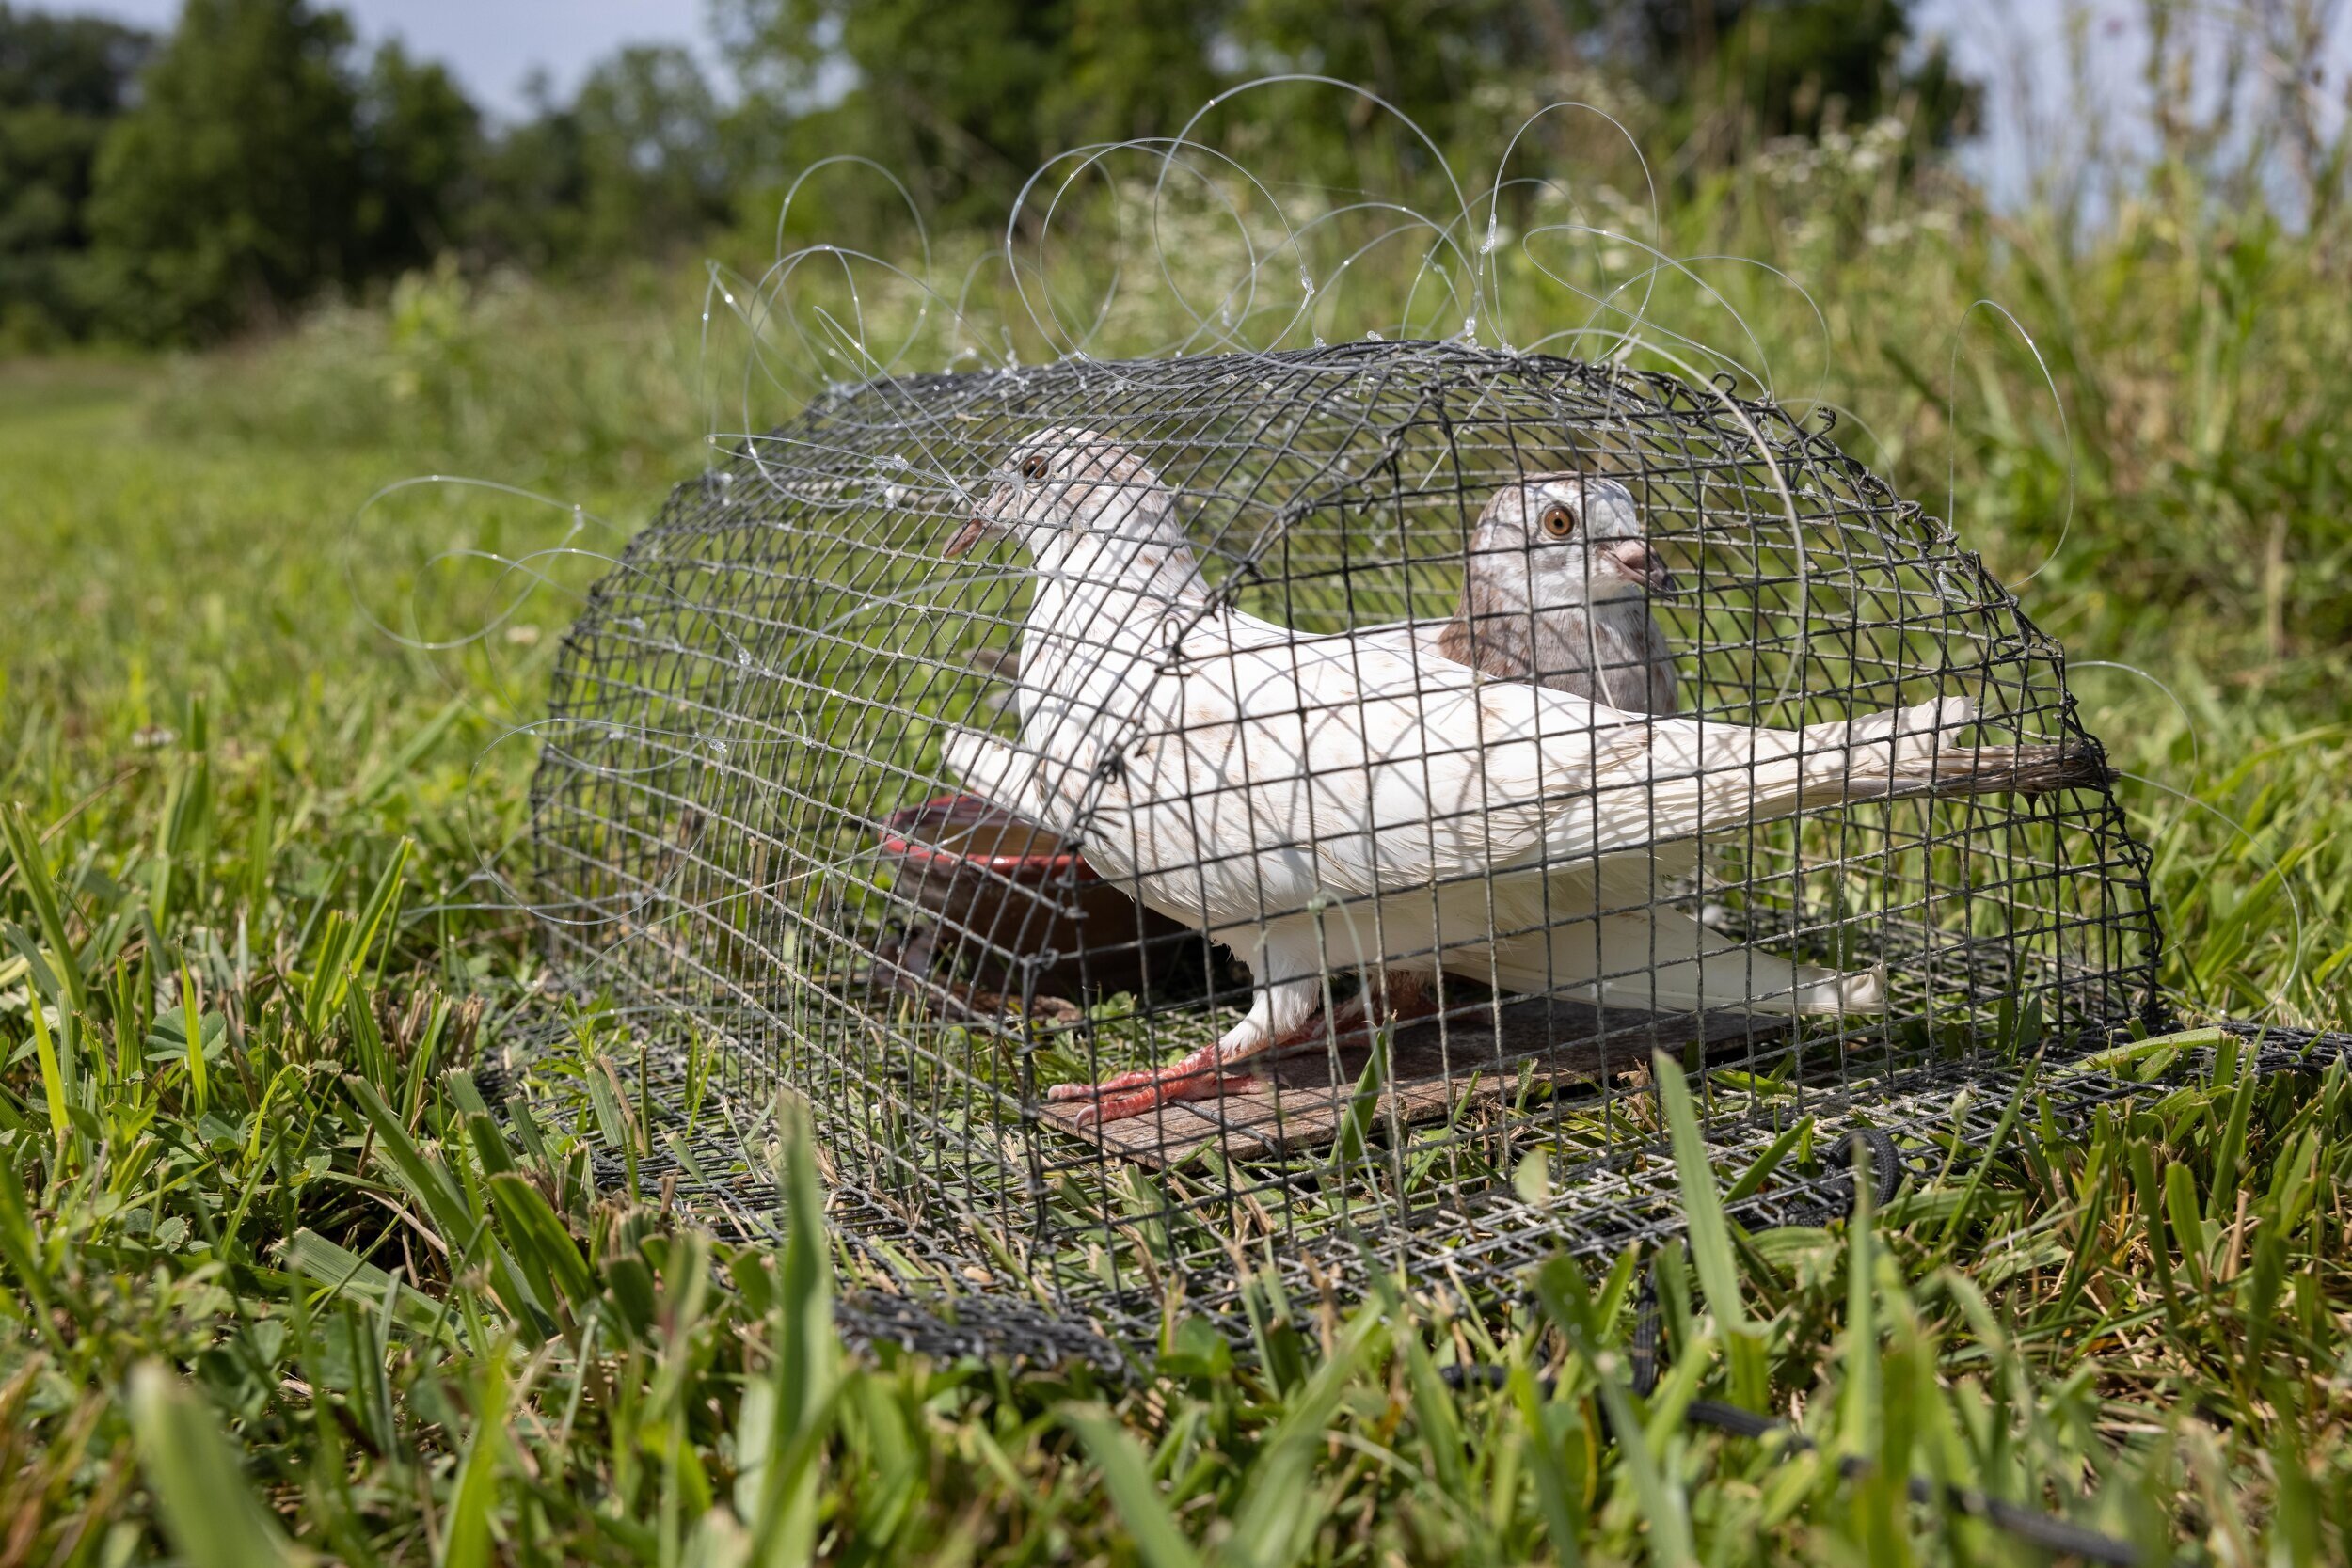  Doves used to lure raptors for tagging (they weren’t harmed!). Photo by Callie Broaddus.  